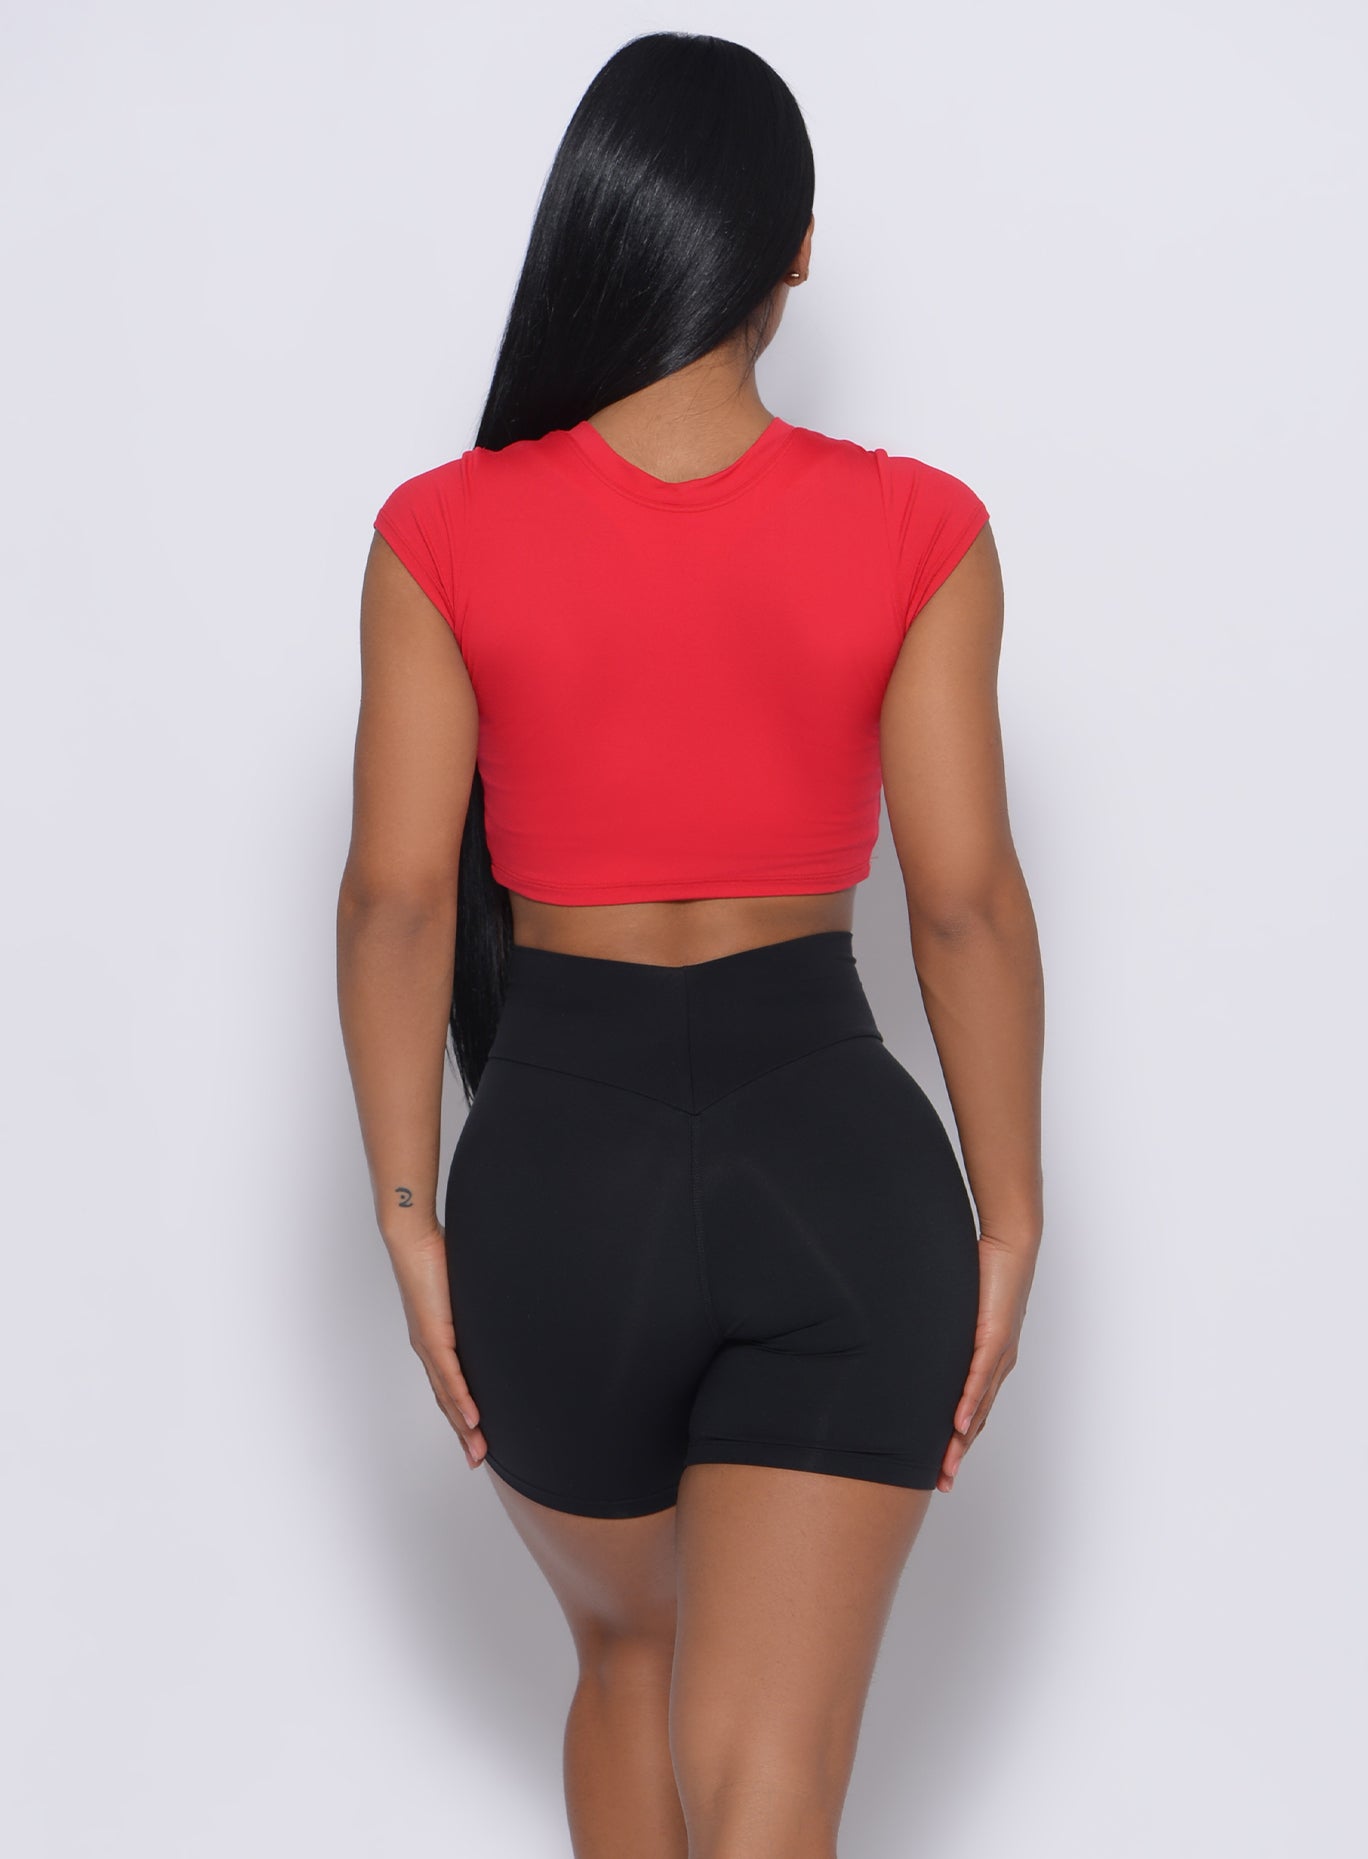 Back profile  view of a model in our crop fit fam tee in apple red color and a black shorts